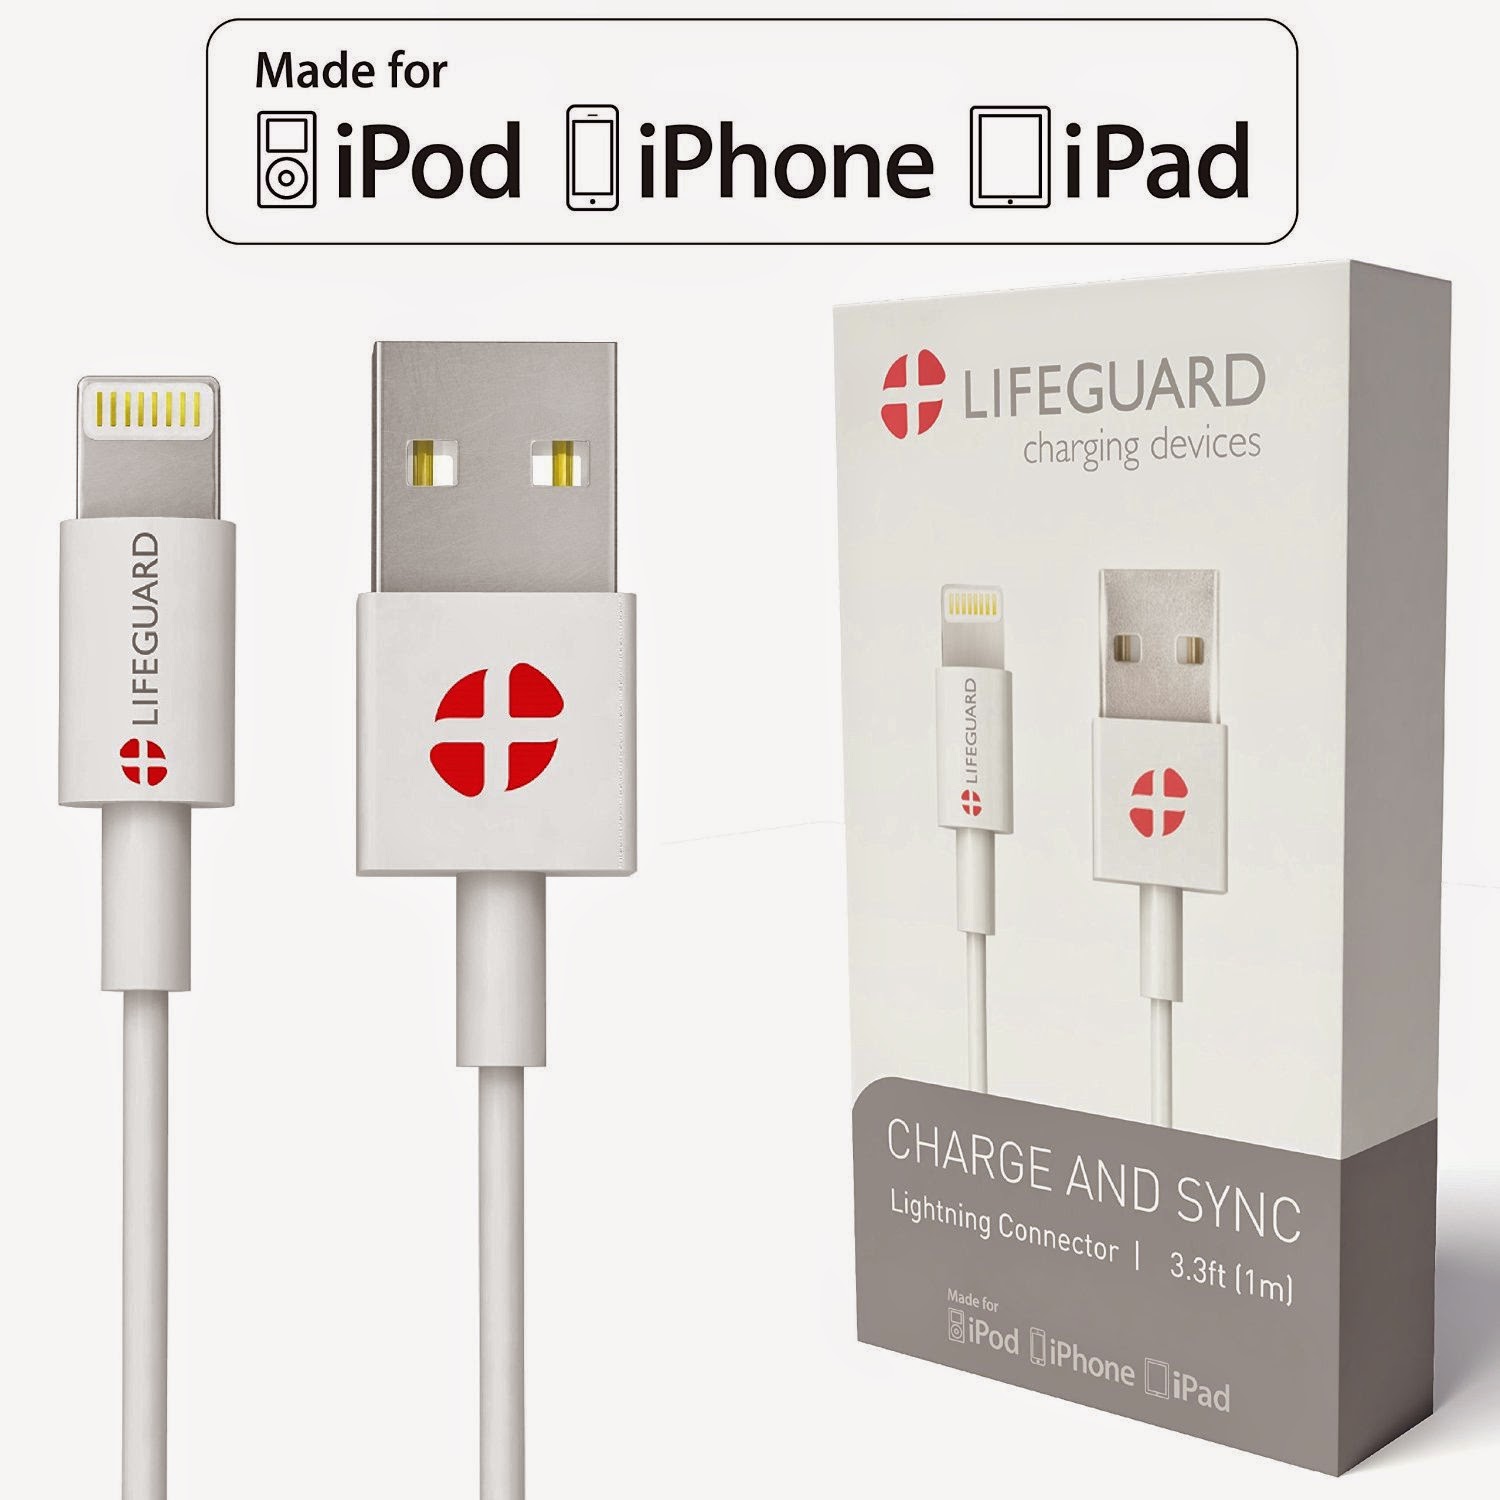 +LIFEGUARD Charge and Sync Lightning Connector